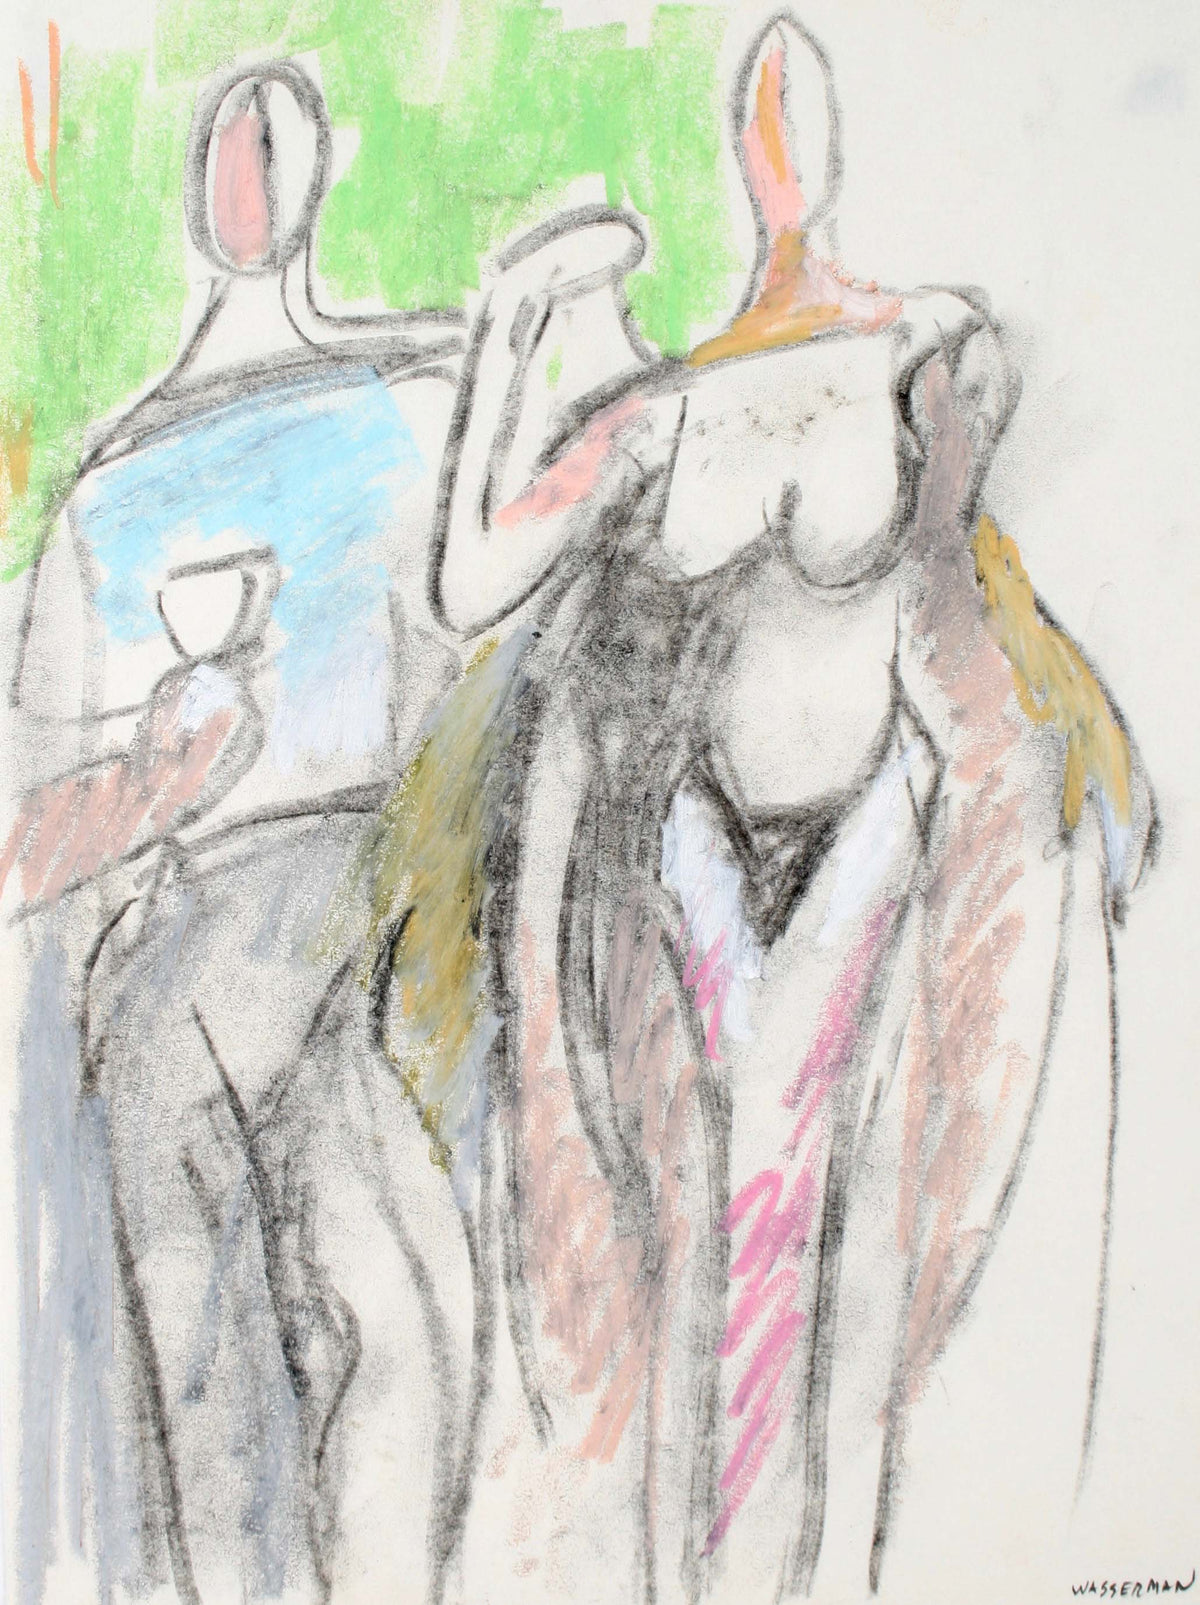 Modernist Abstracted Figures&lt;br&gt;Mid-Late 20th Century Pastel and Charcoal&lt;br&gt;&lt;br&gt;#72107